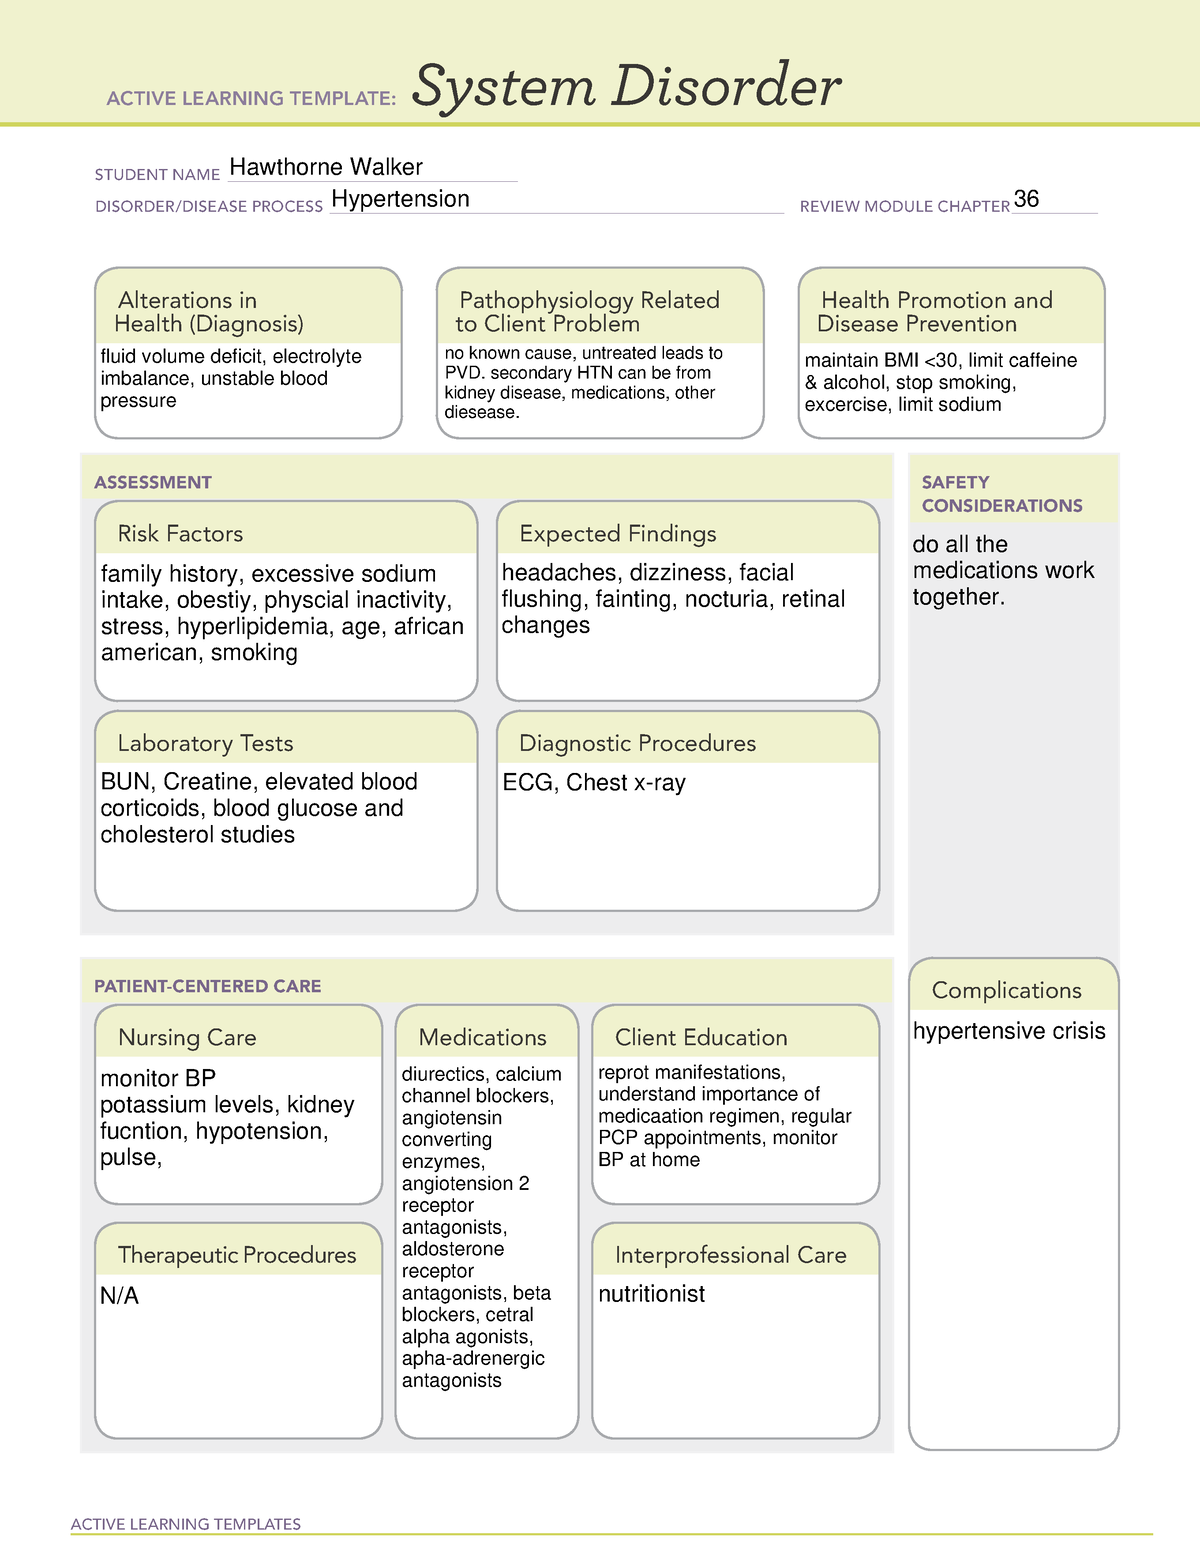 hypertension-ati-system-disorder-template-active-learning-templates